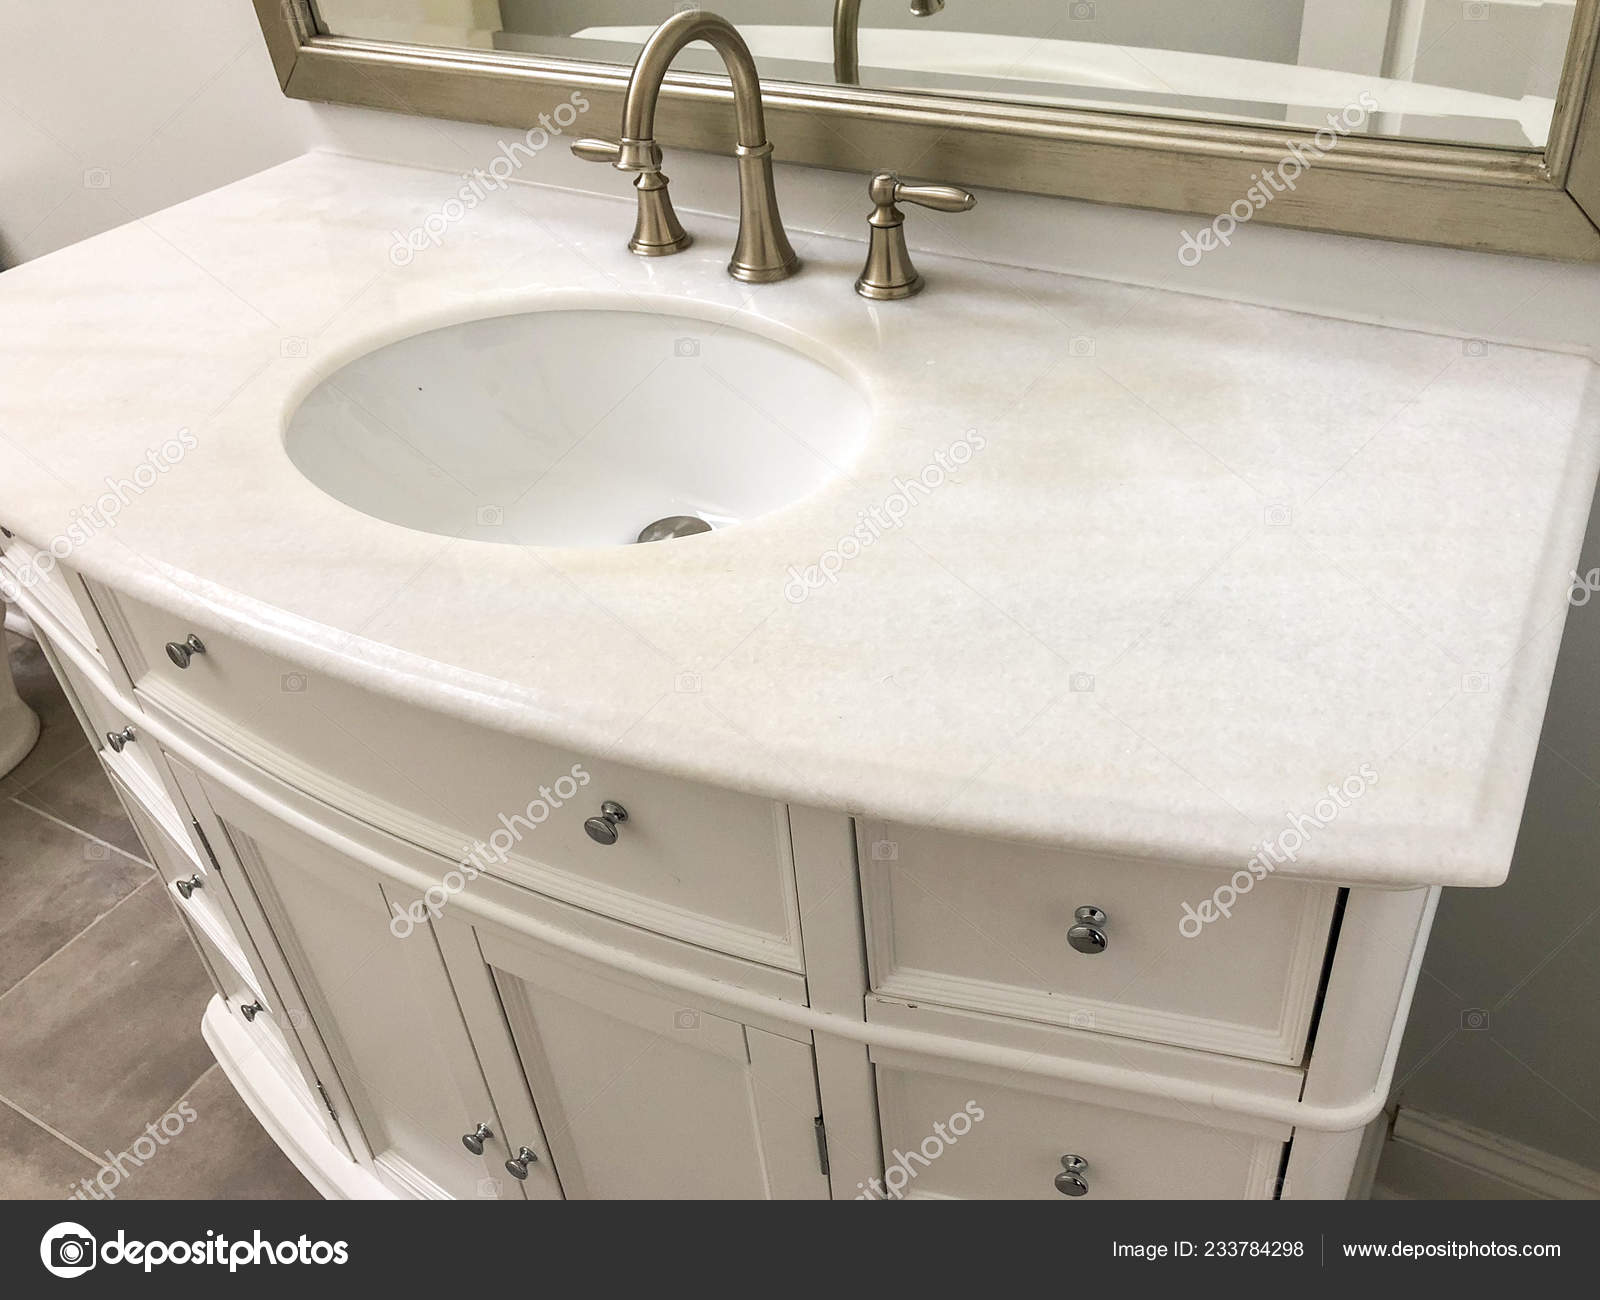 Bathroom Wooden White Cabinet Marble Counter Oval Sink Faucet